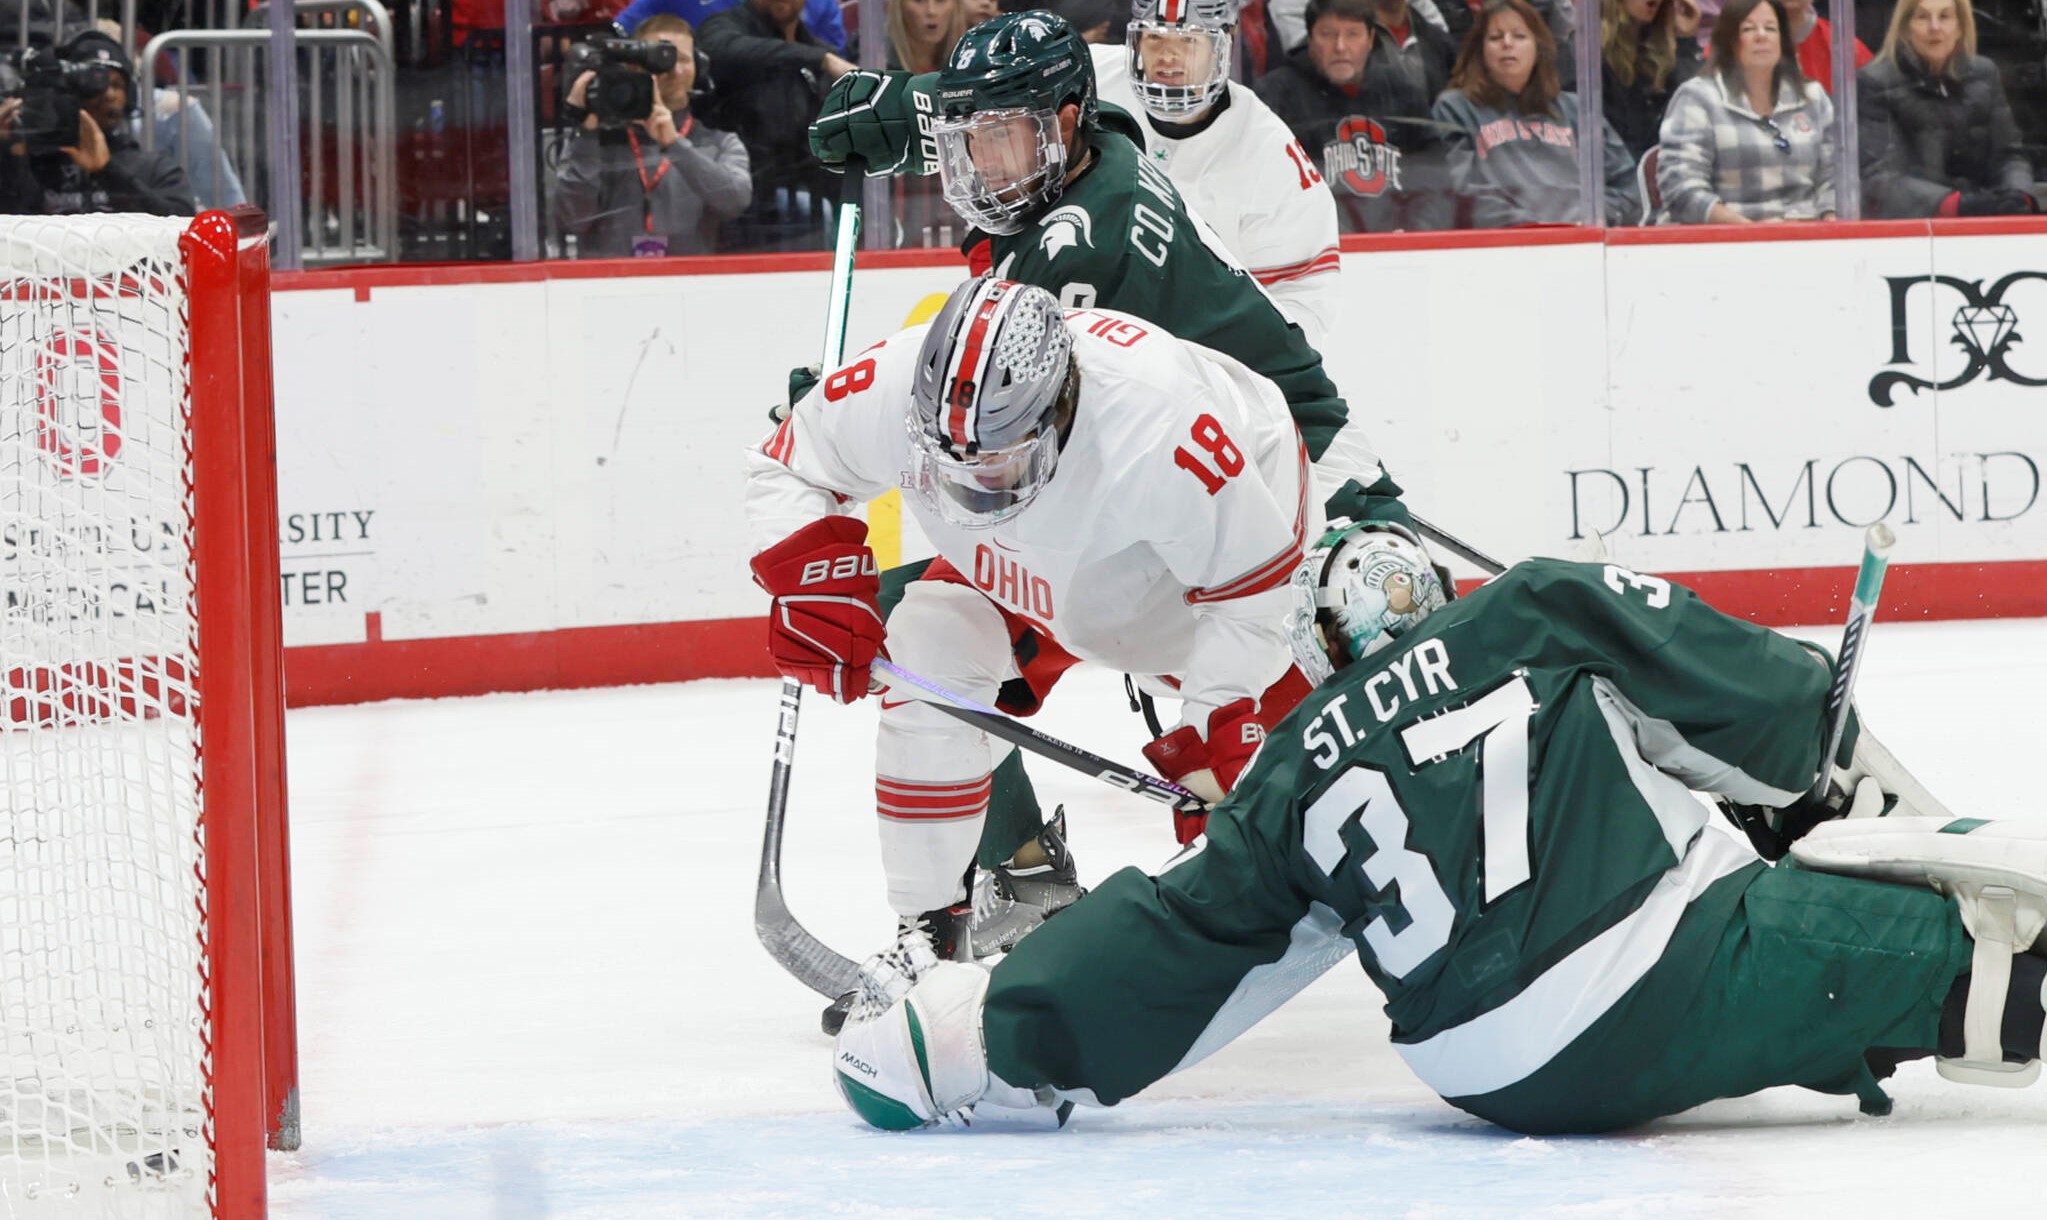 This Week in Big Ten Hockey: Ohio State climbing conference ladder with weekend mindset ‘about getting two wins’